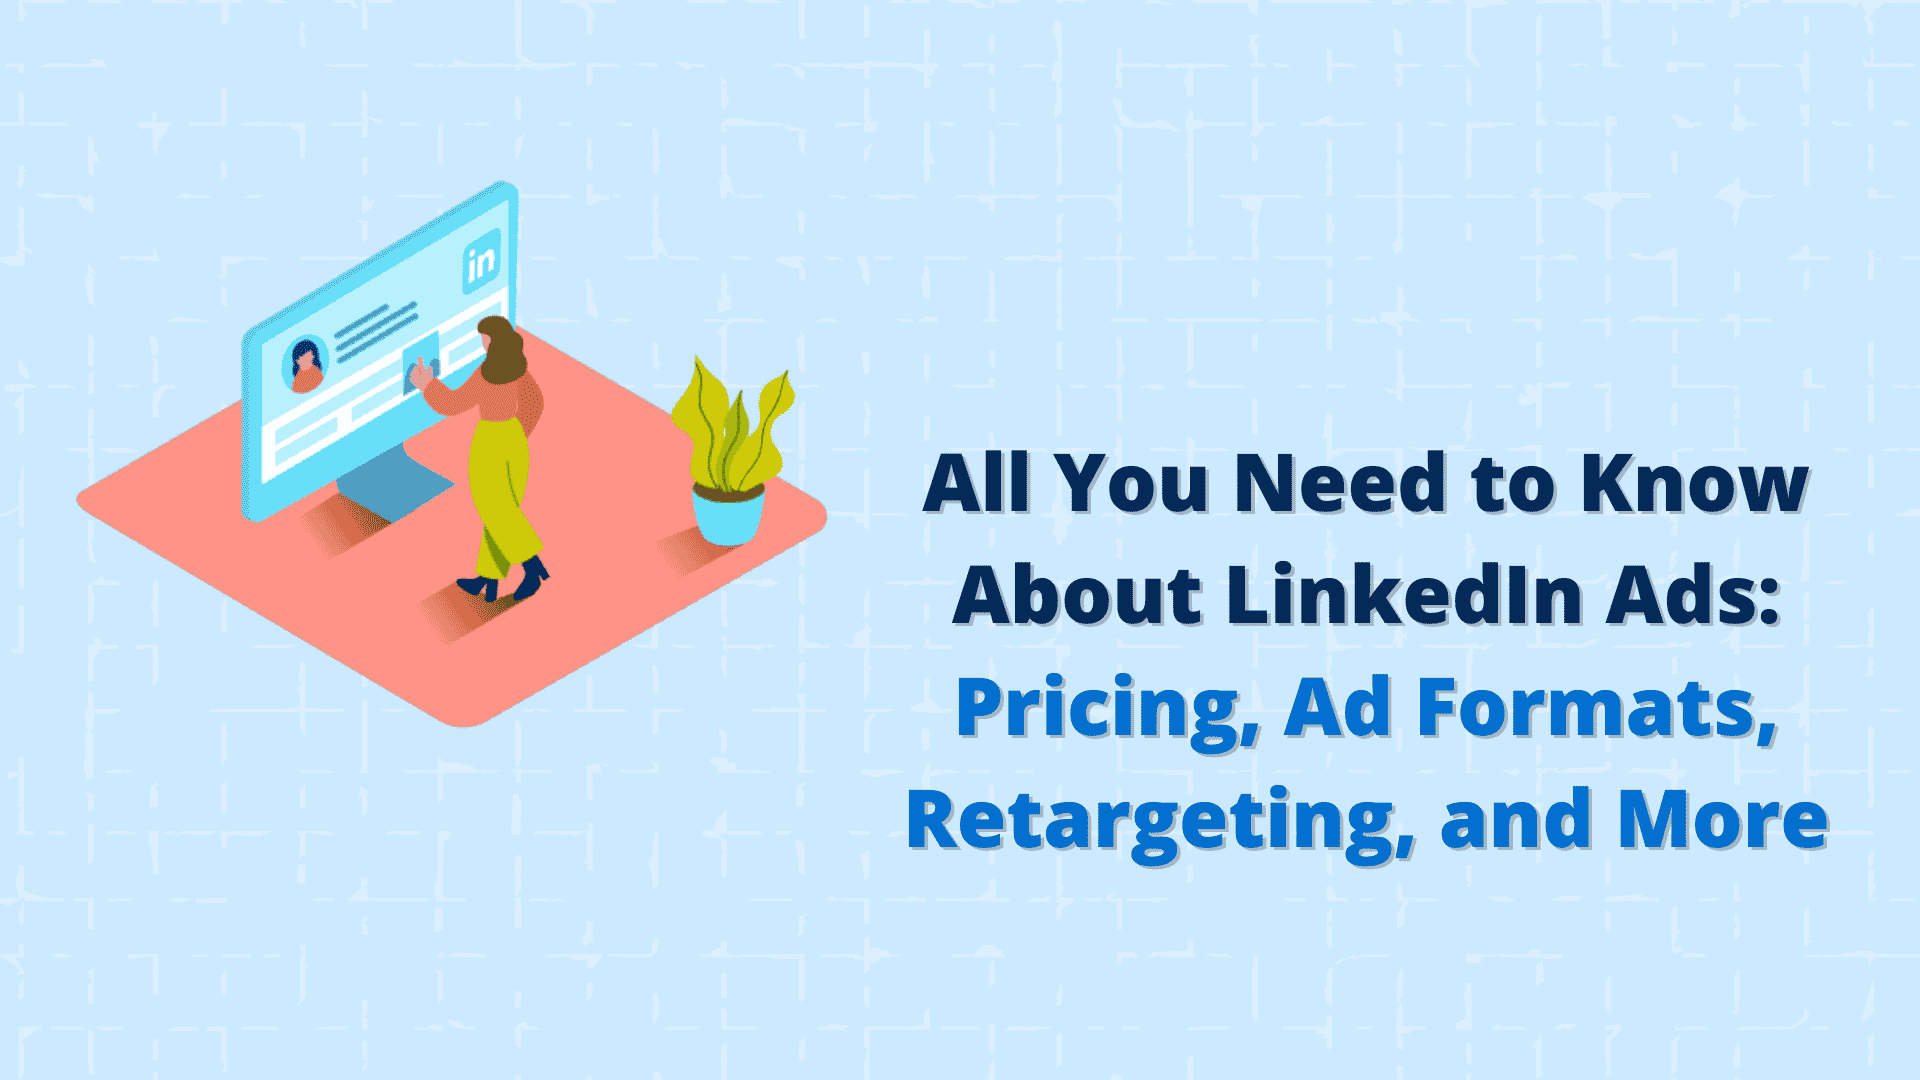 LinkedIn Ads Here's What You Need to Know